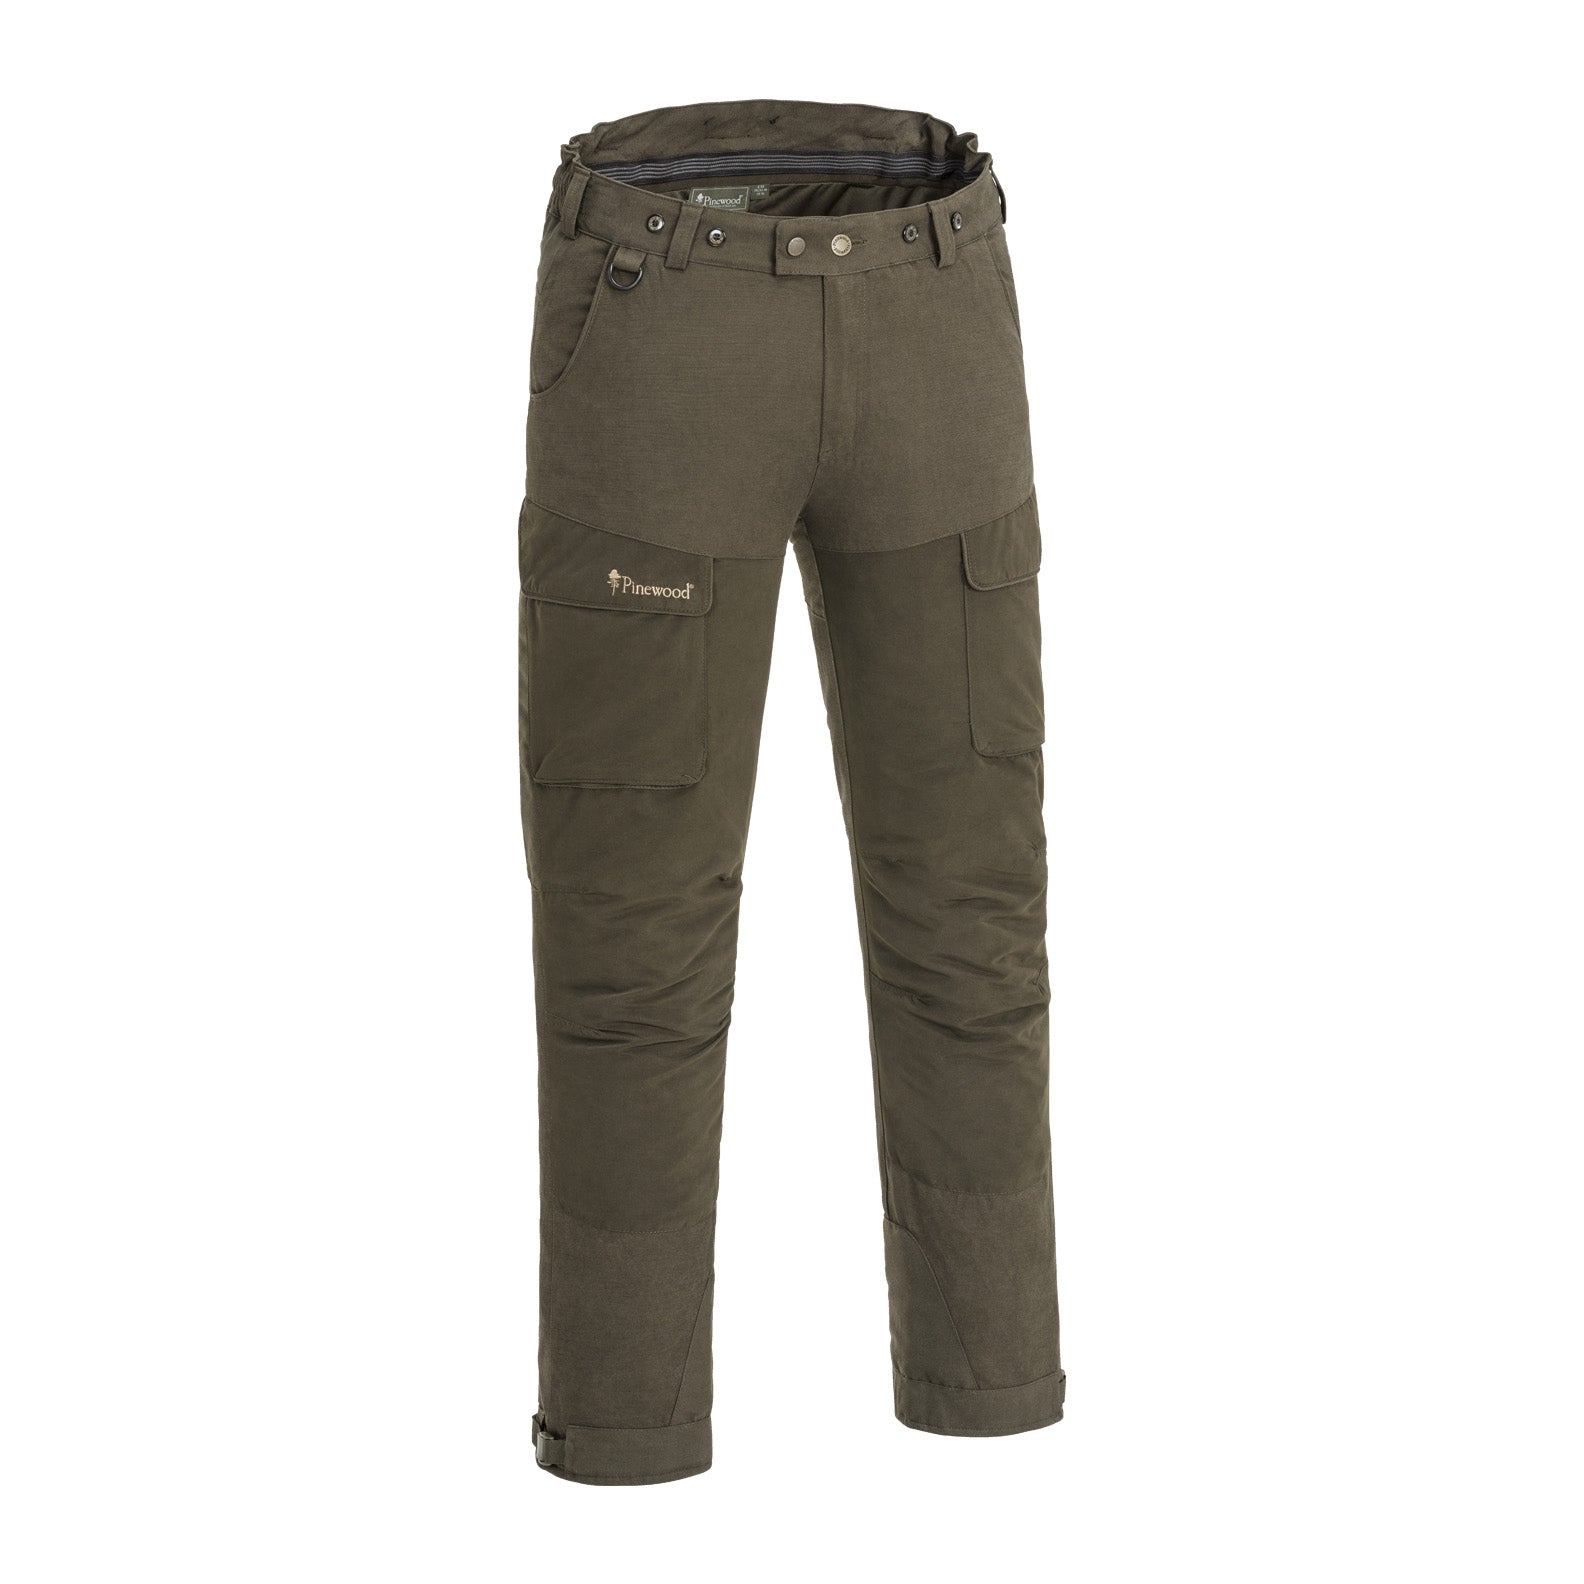 Pinewood Pro Hunter Xtreme Trousers | Pinewood – New Forest Clothing